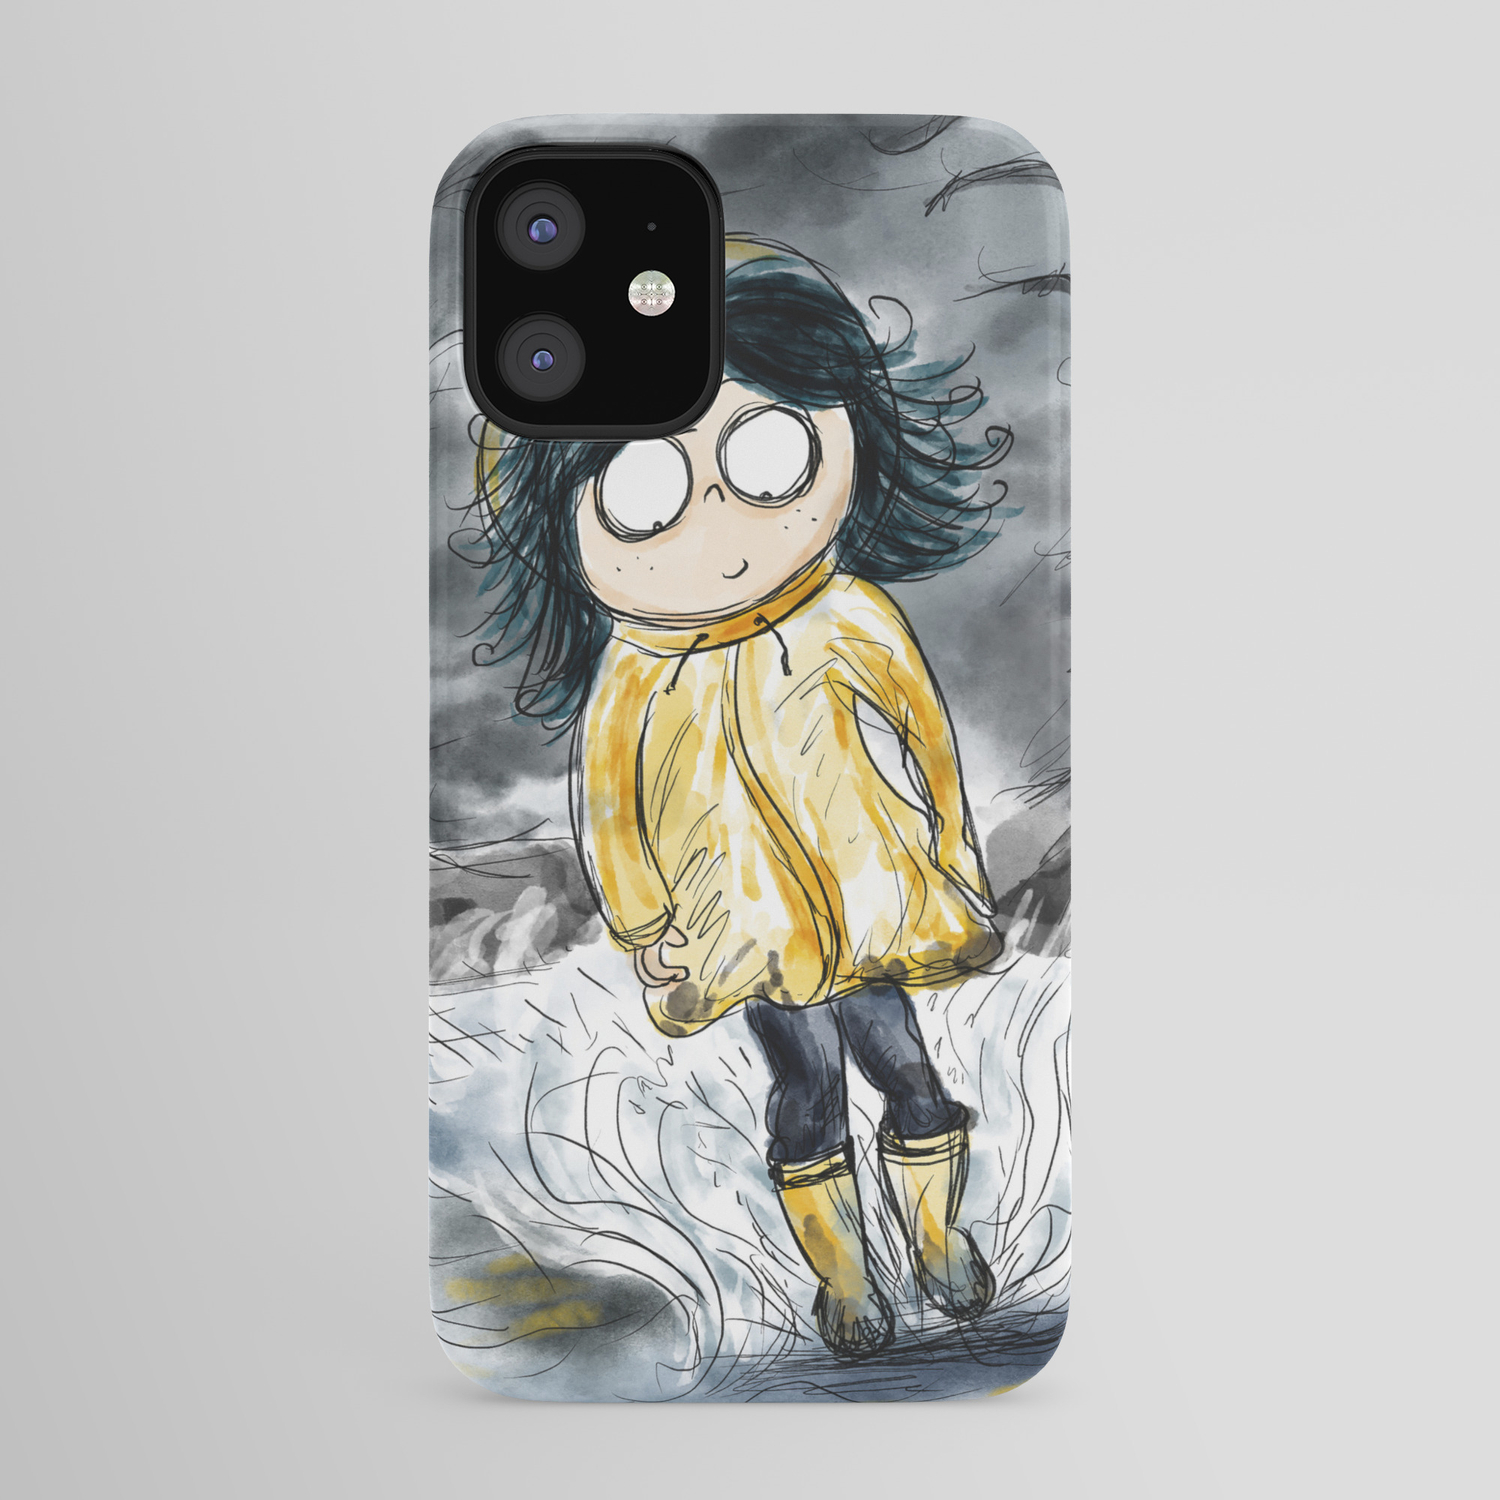 Coraline in the Rain iPhone Case by Holly Does Art | Society6